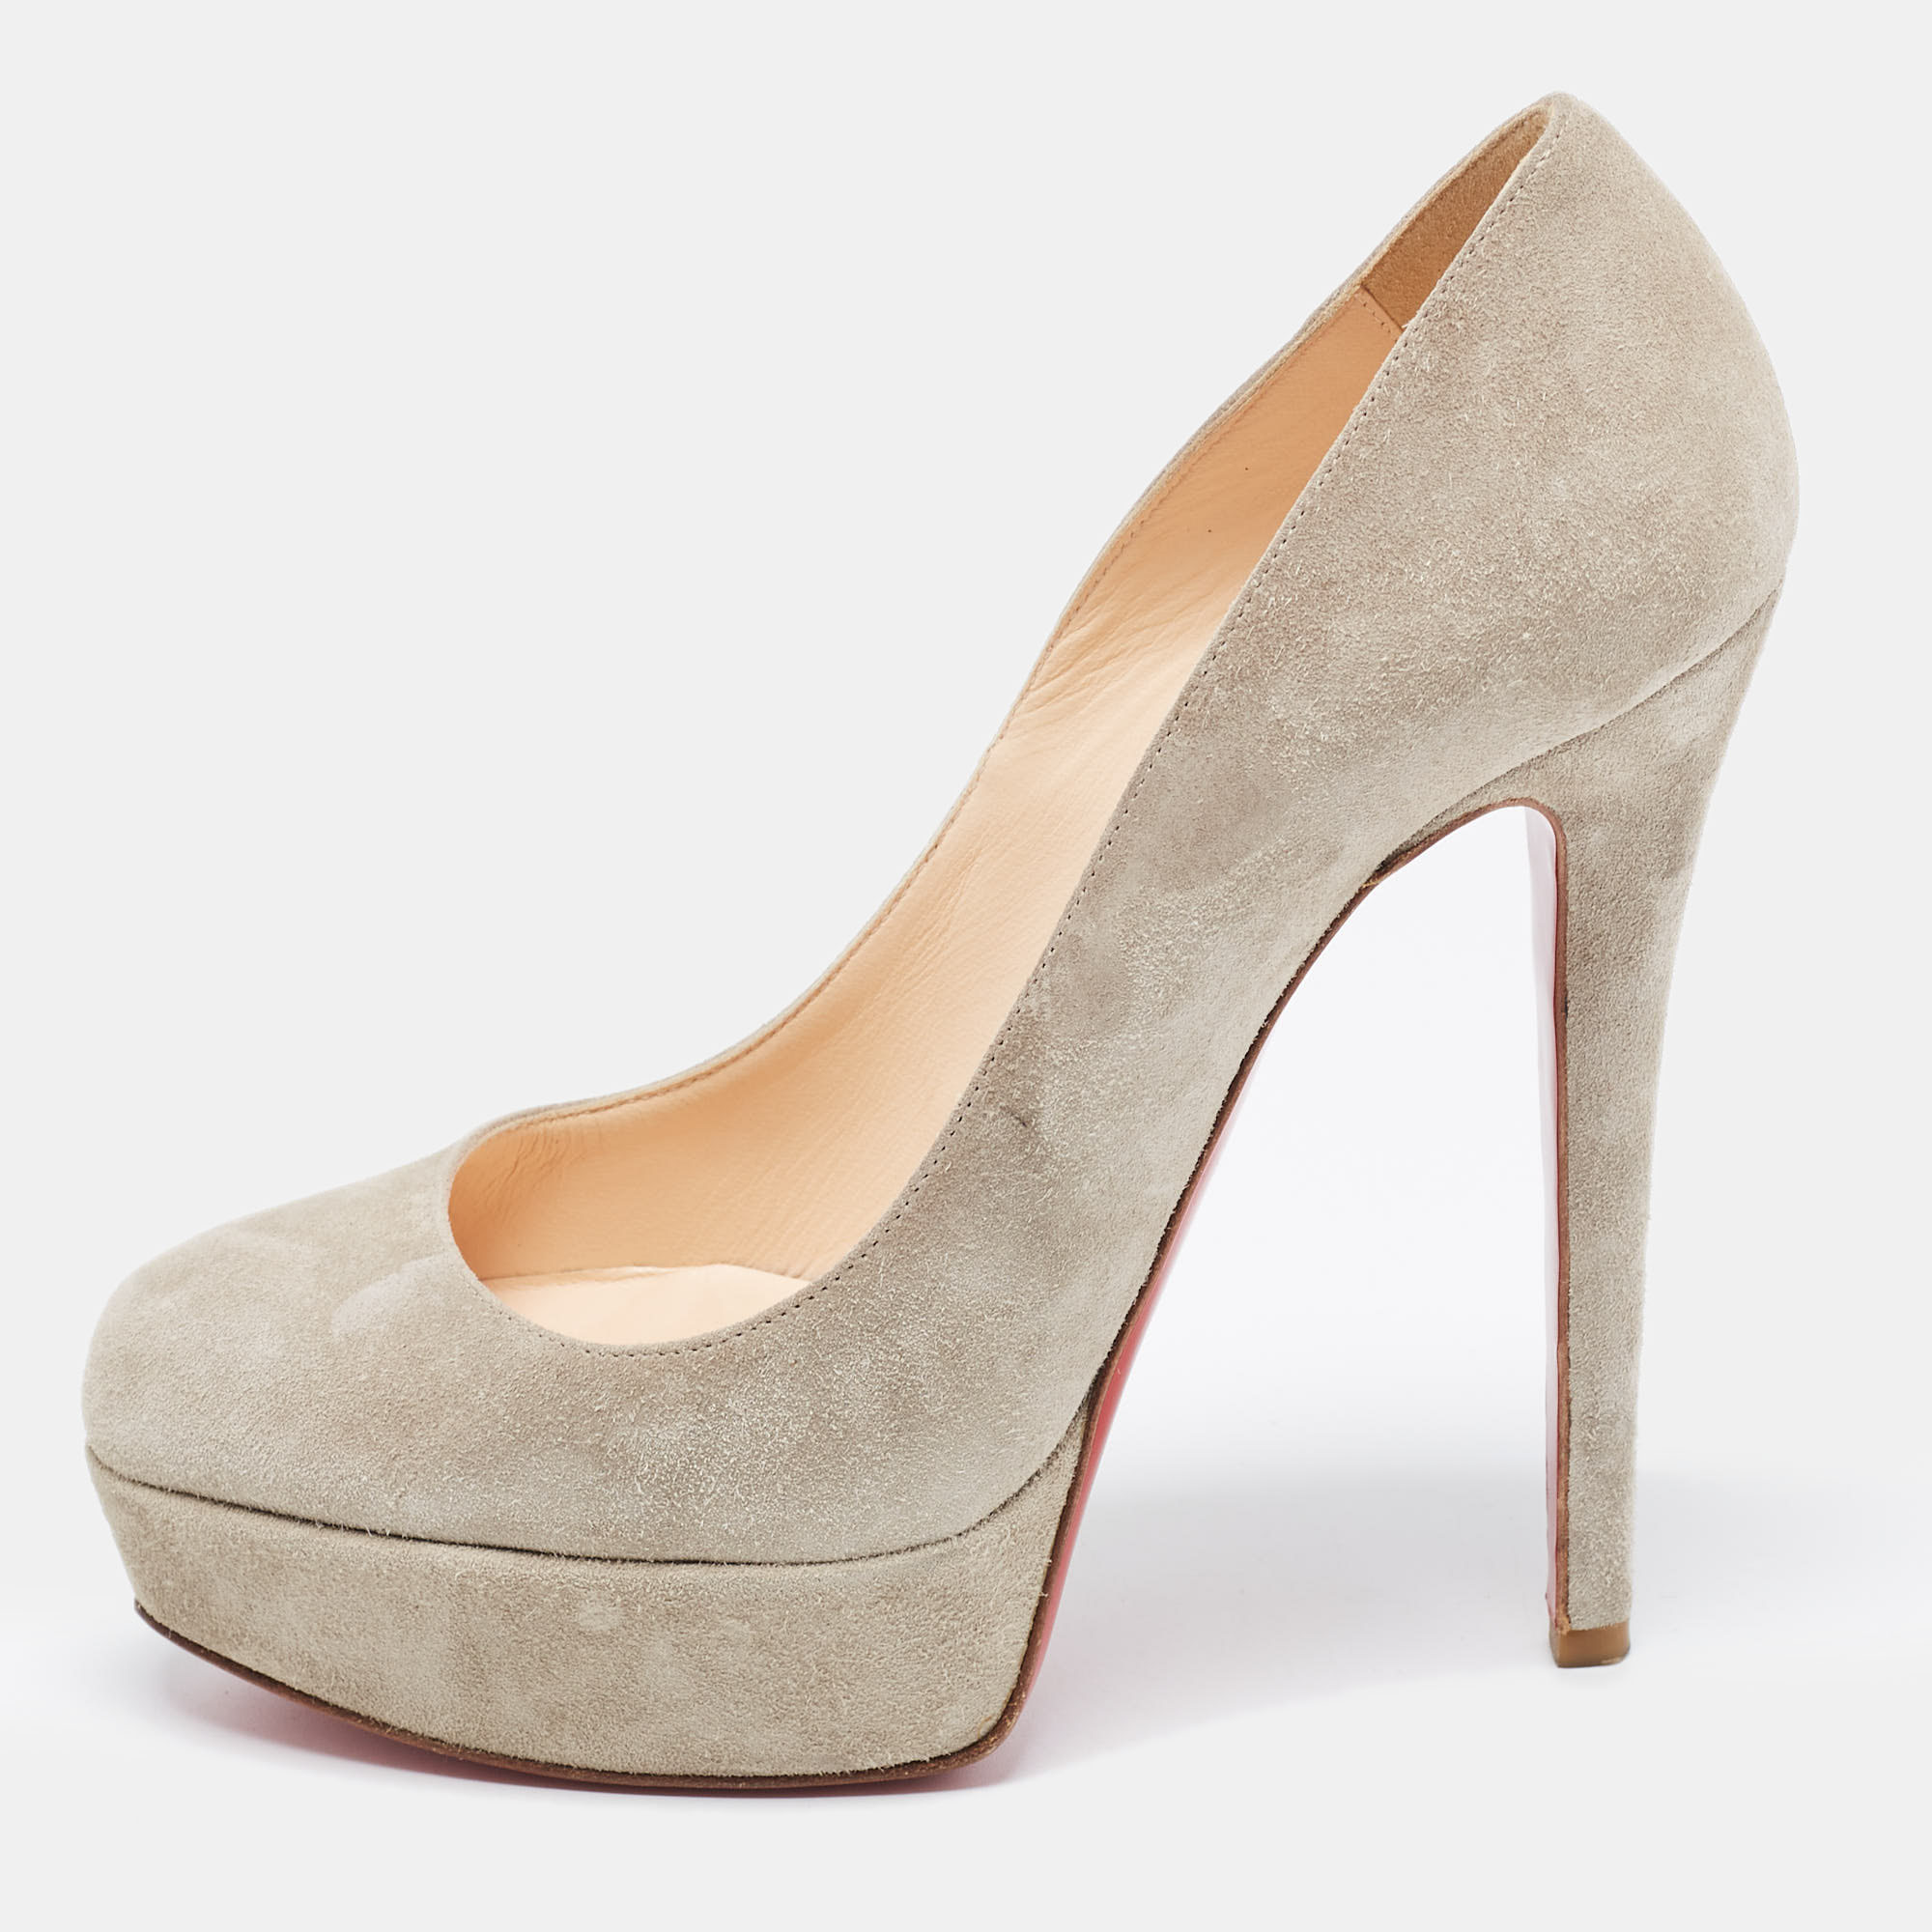 Pre-owned Christian Louboutin Grey Suede Bianca Pumps Size 36